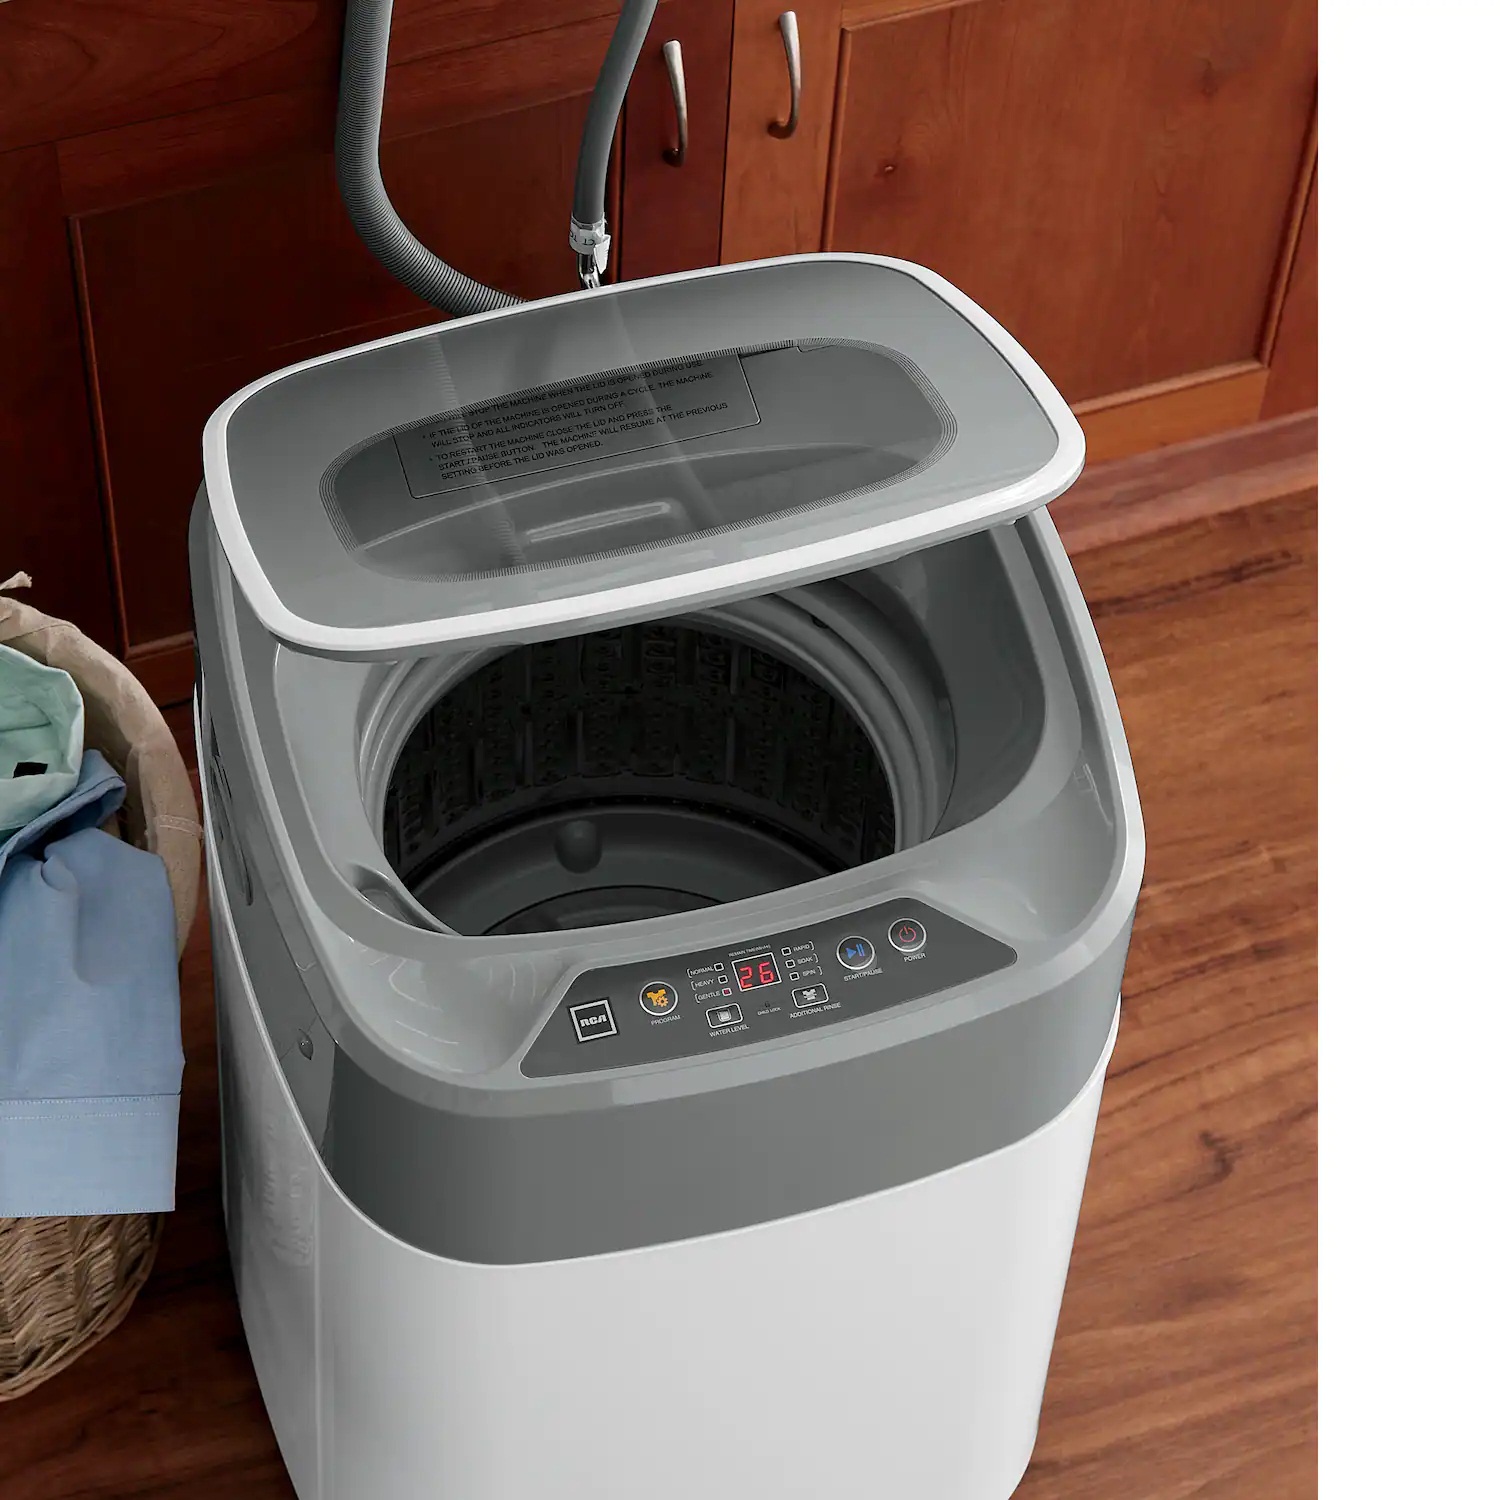 How Does A Portable Washer Work